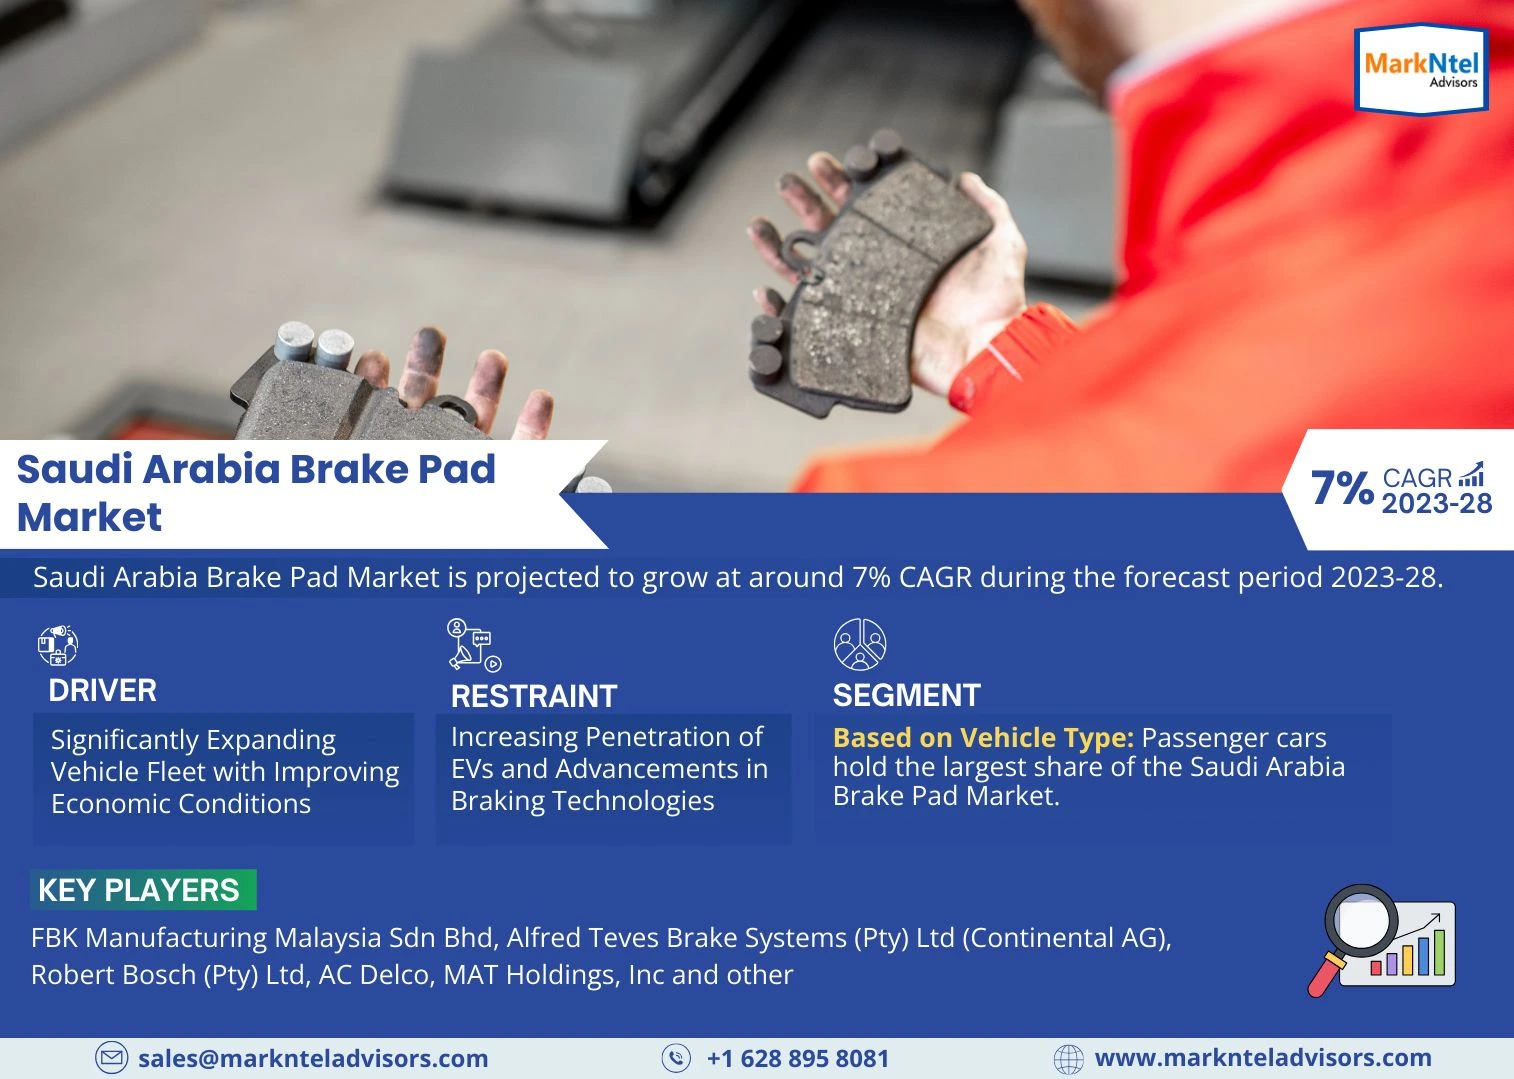 Saudi Arabia Brake Pad Market Growth Rate, Historical Data, Geographical Lead, Top Companies and Industry Segment